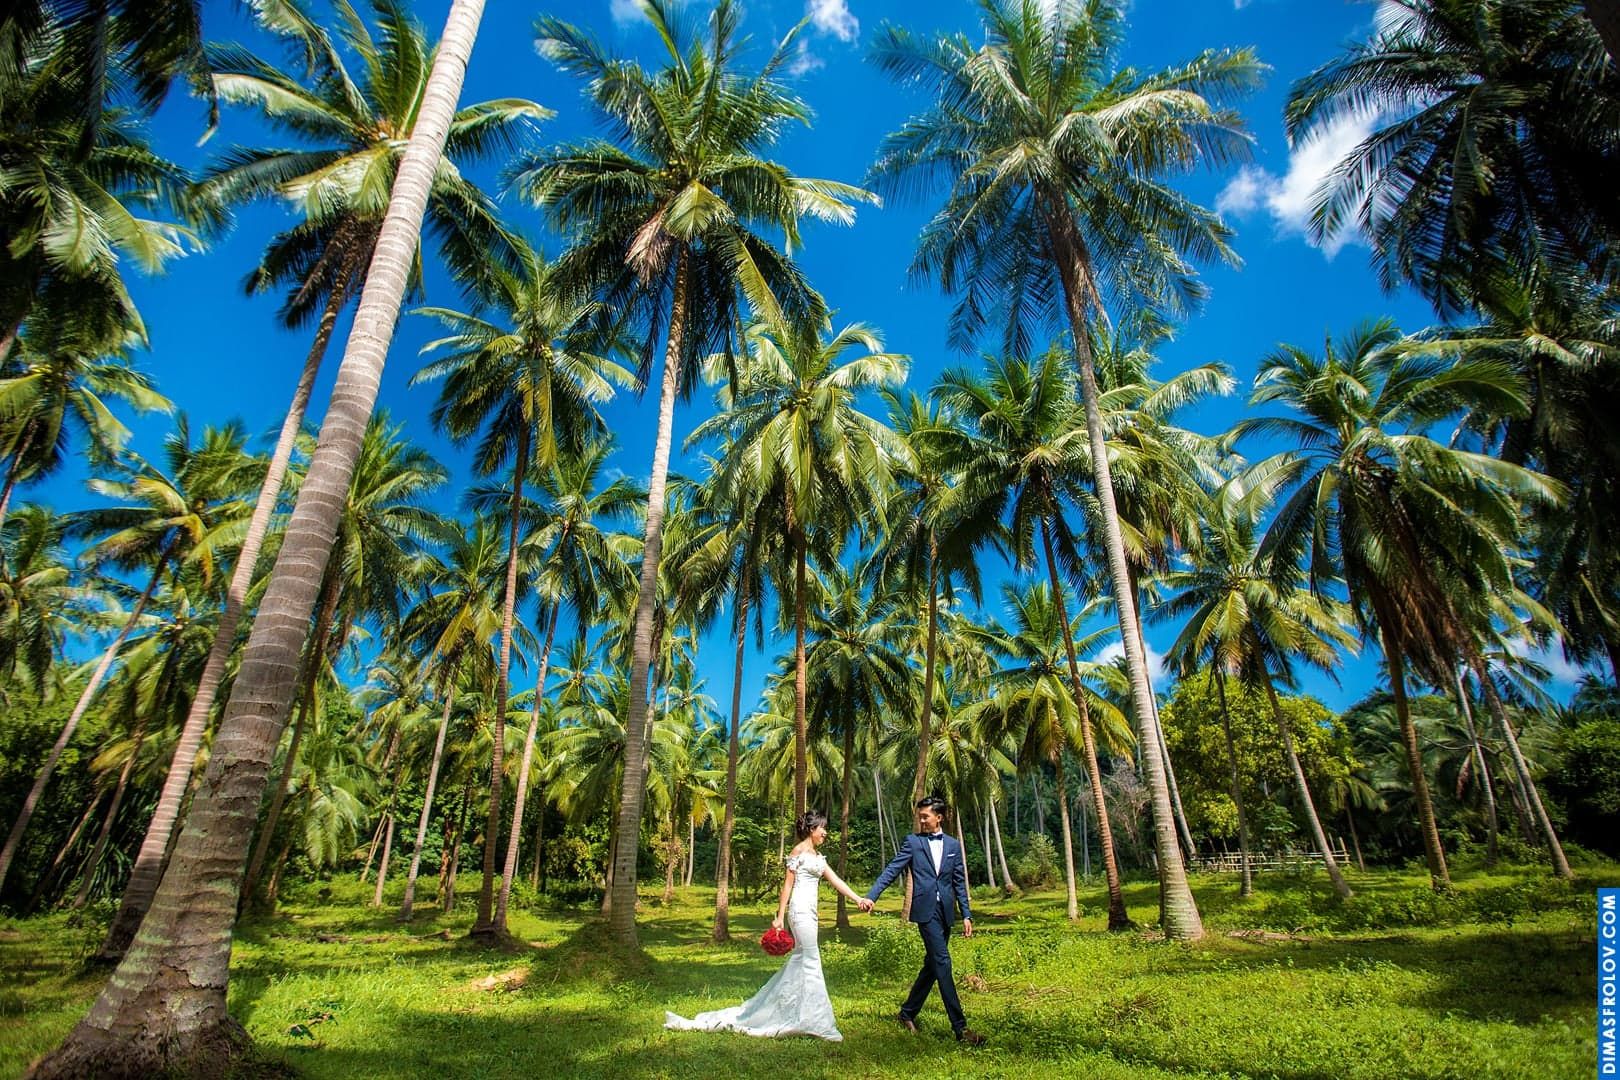 Coconut forest as location for photo shoot. photographer Dimas Frolov. photo1377